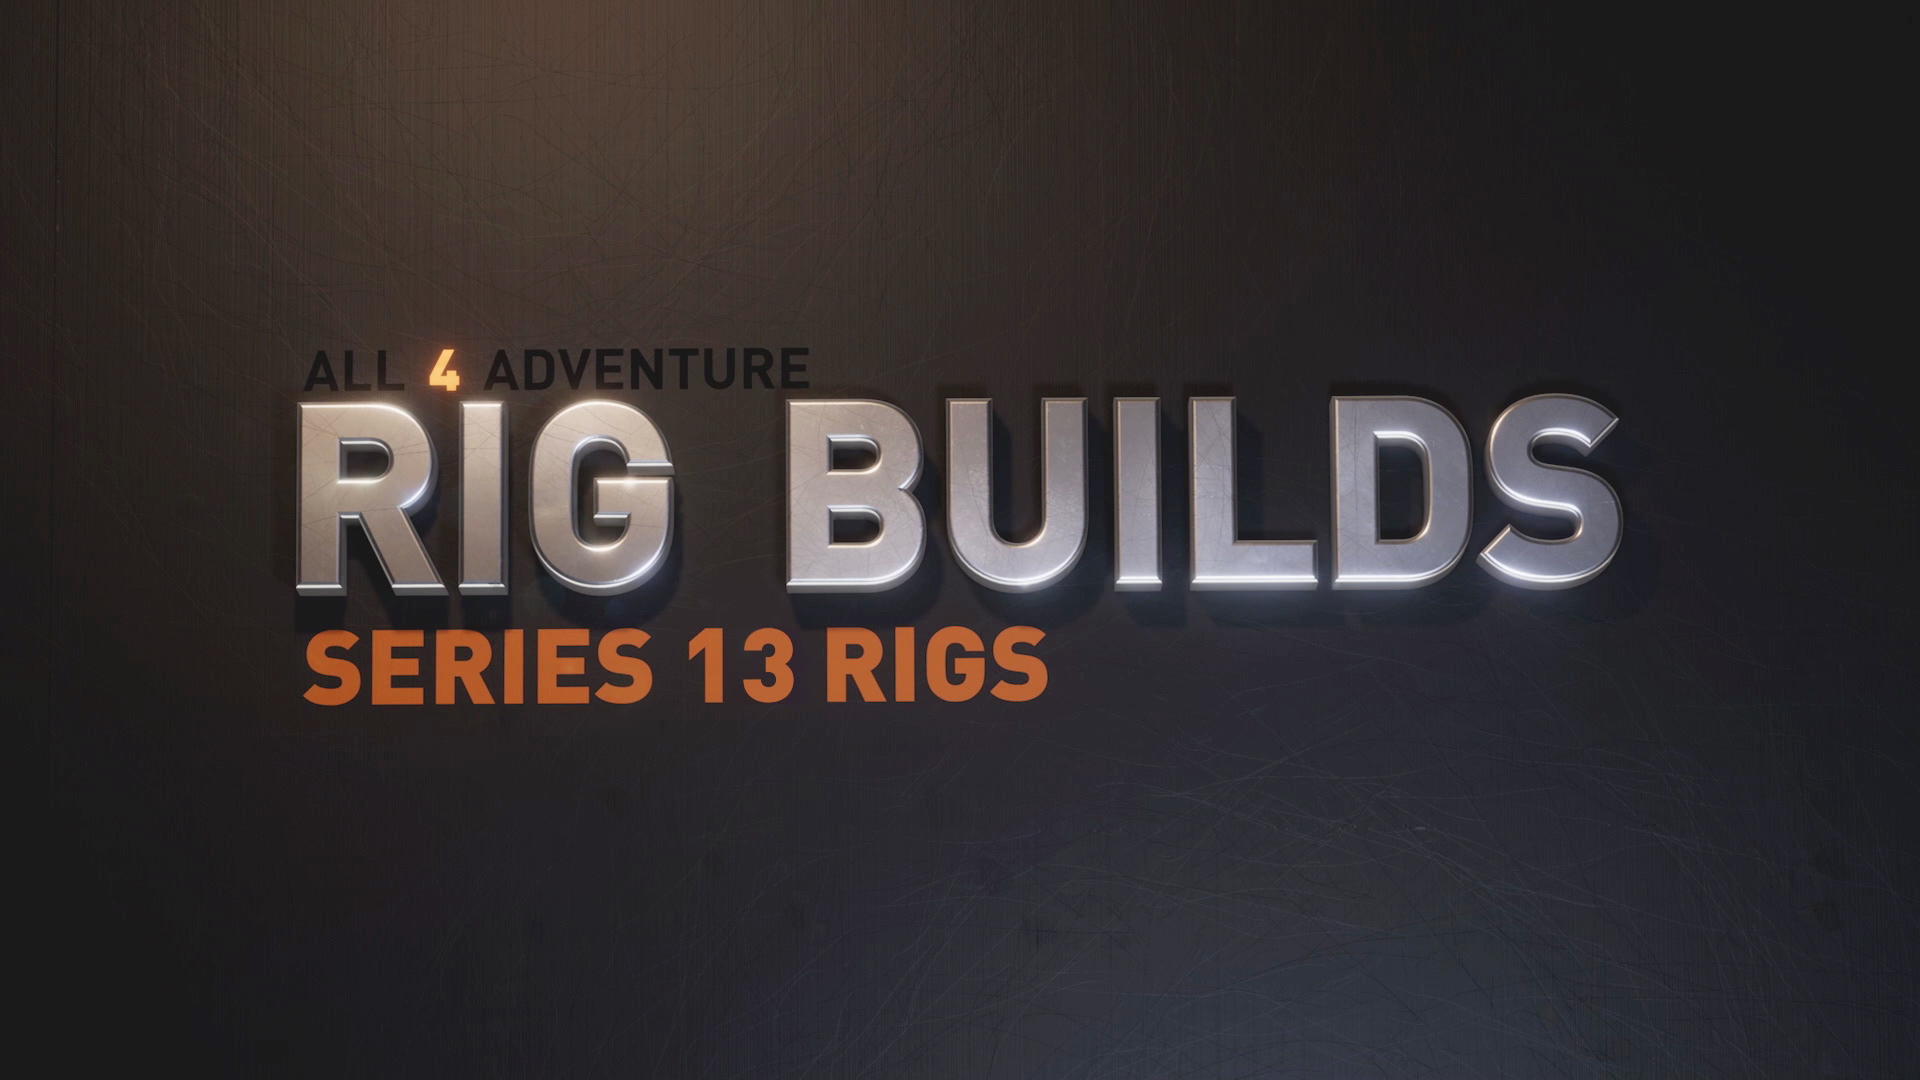 All 4 Adventure Series 13 Rig Builds